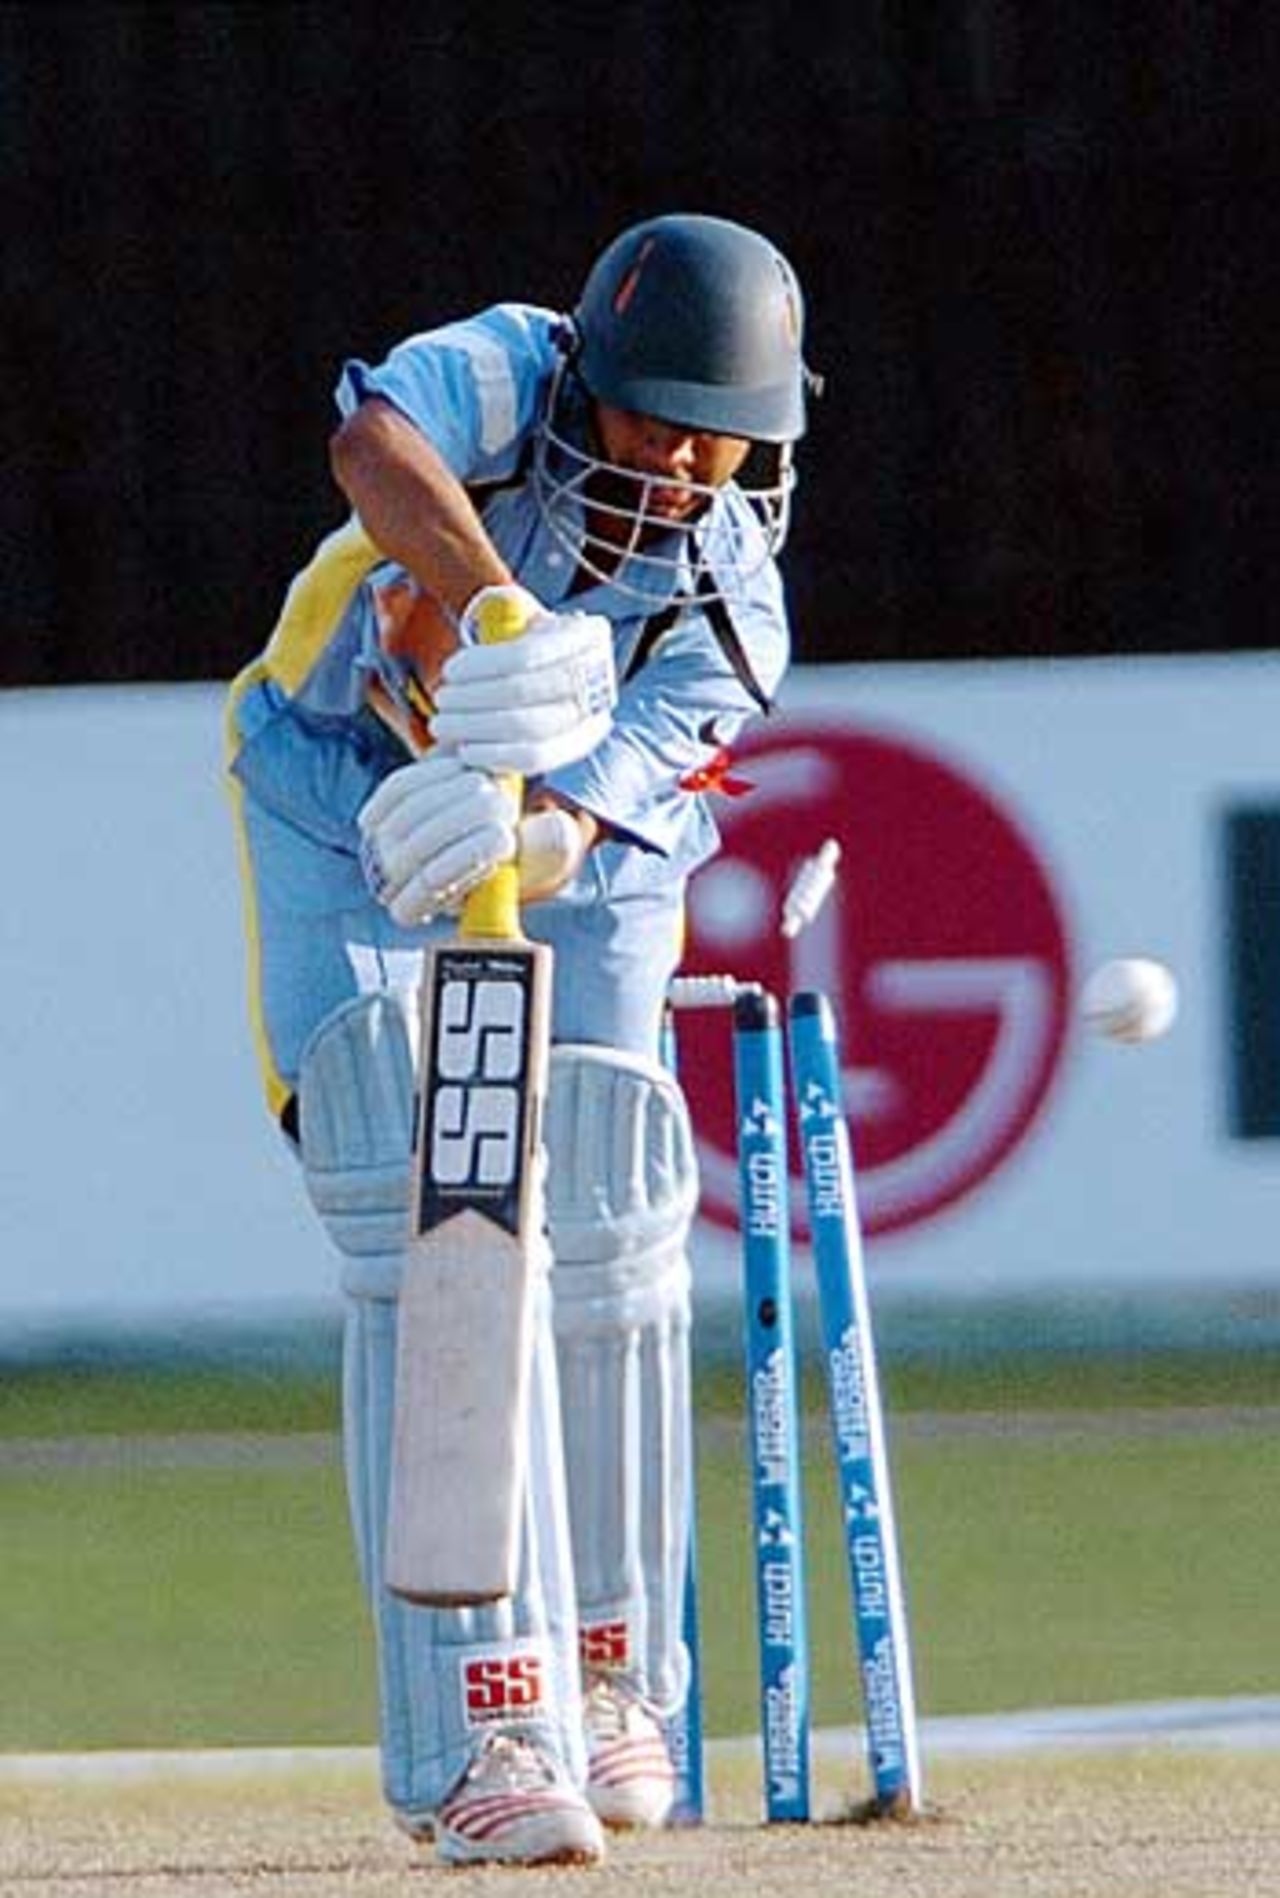 Ravikant Shukla is clean bowled, India v Pakistan, Under-19 World Cup final, Colombo, February 19, 2006